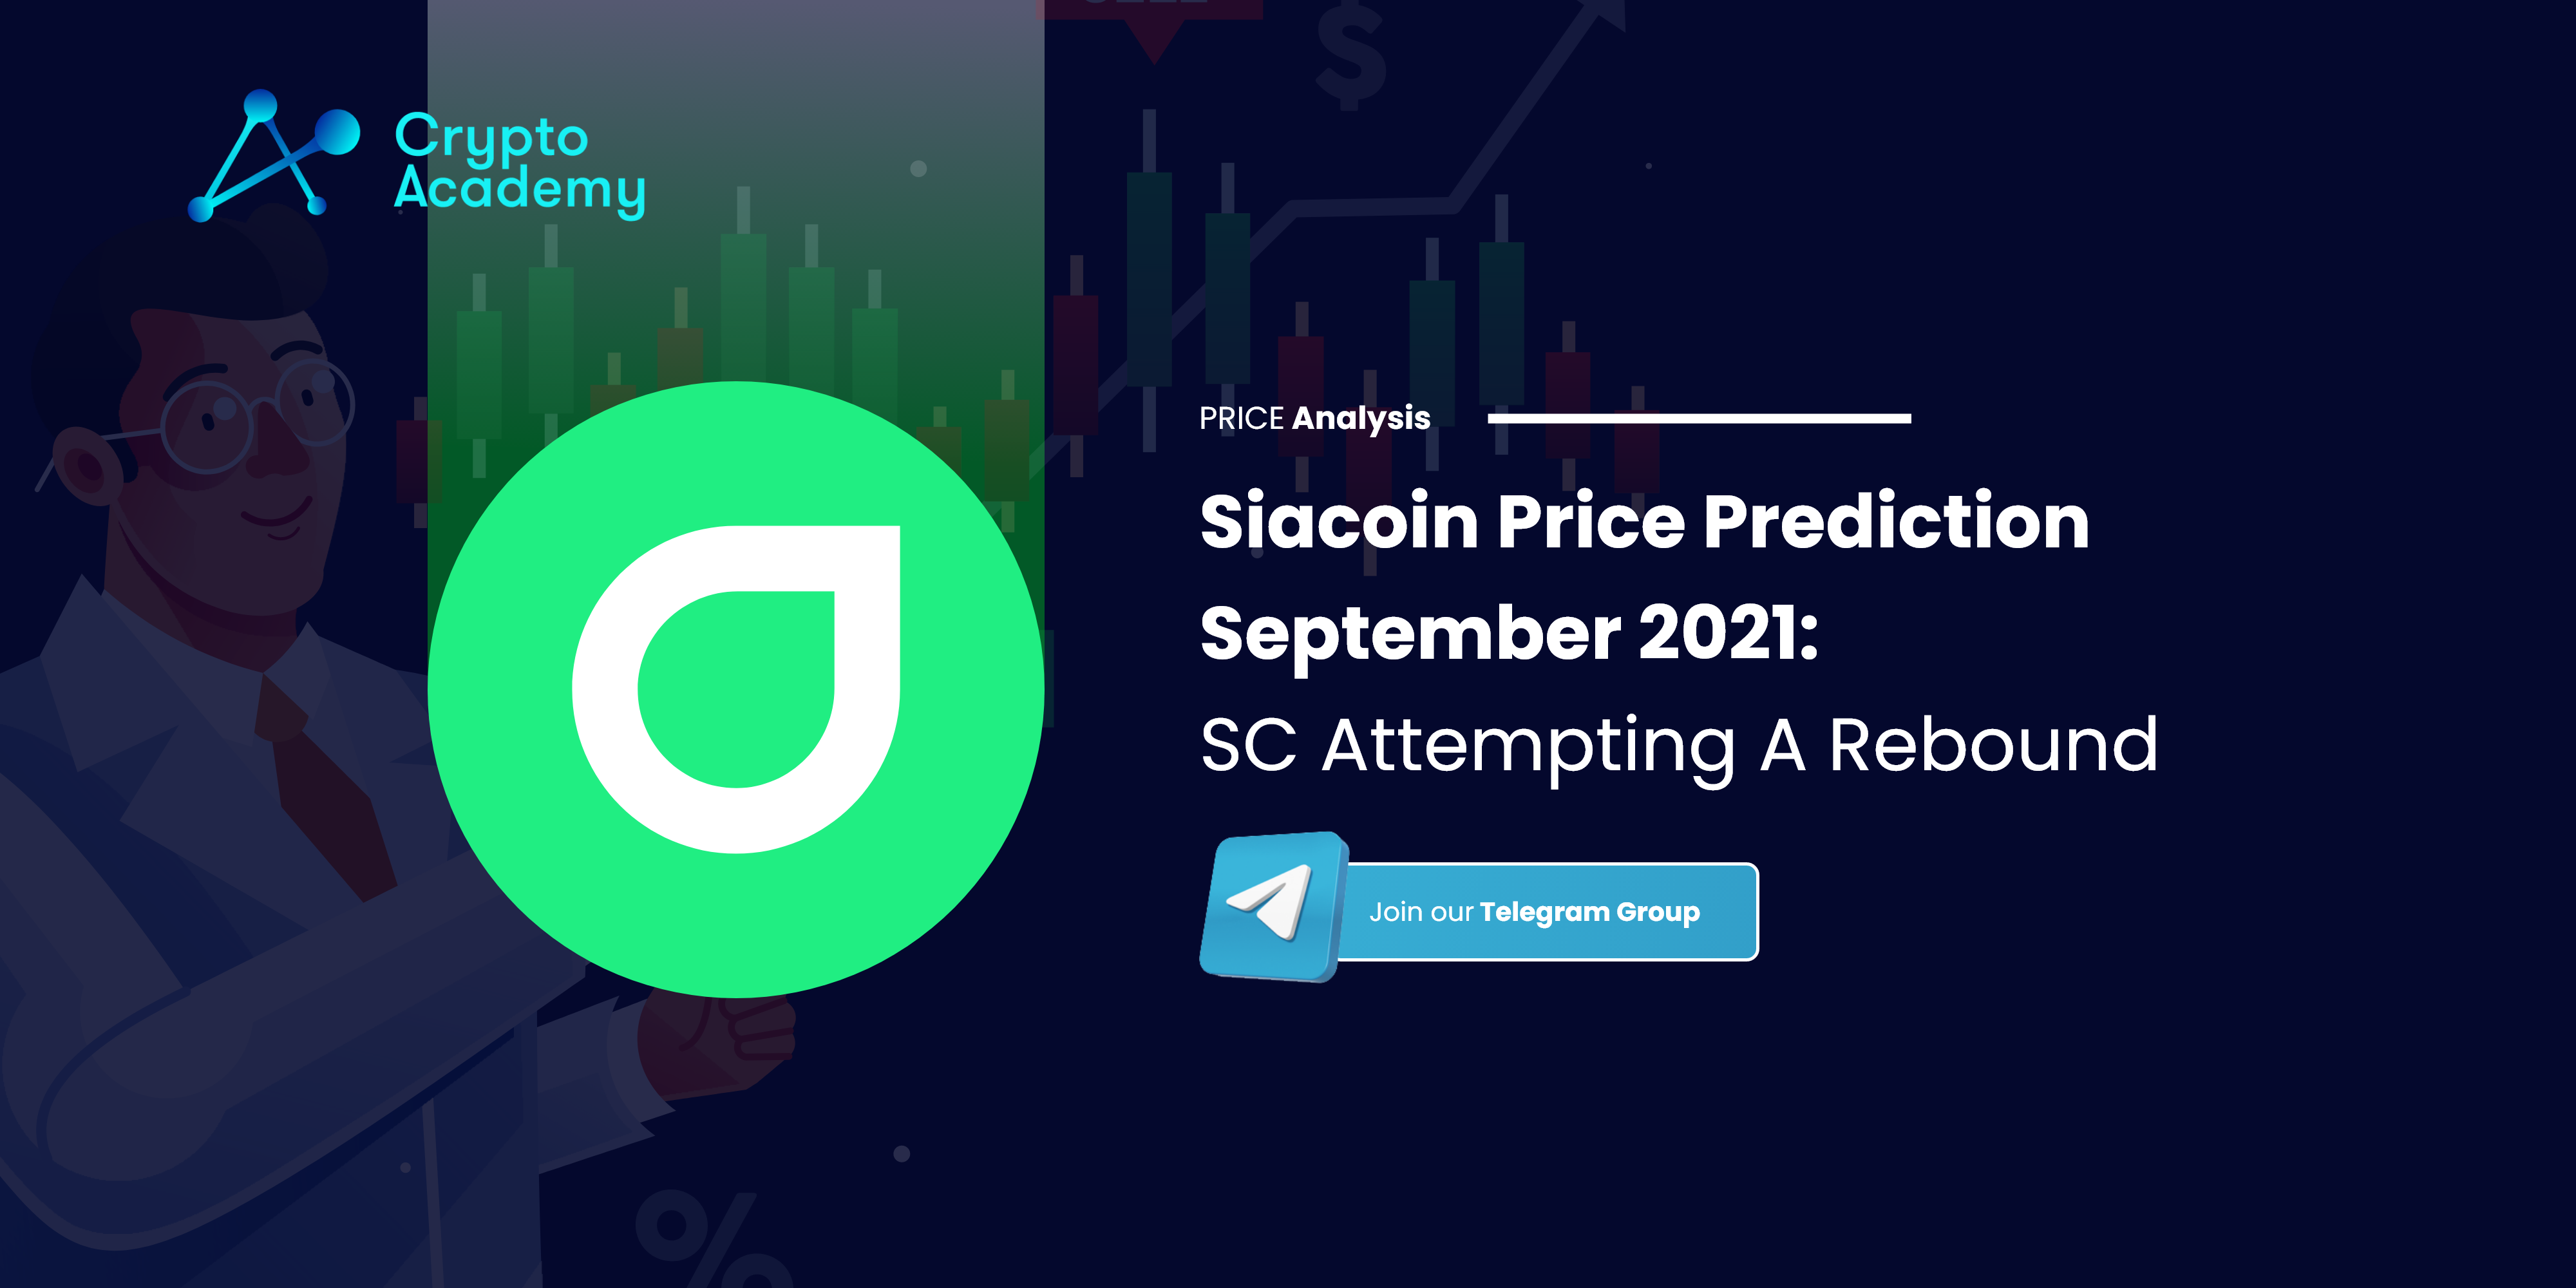 Siacoin Price Prediction September 2021: SC Attempting A Rebound